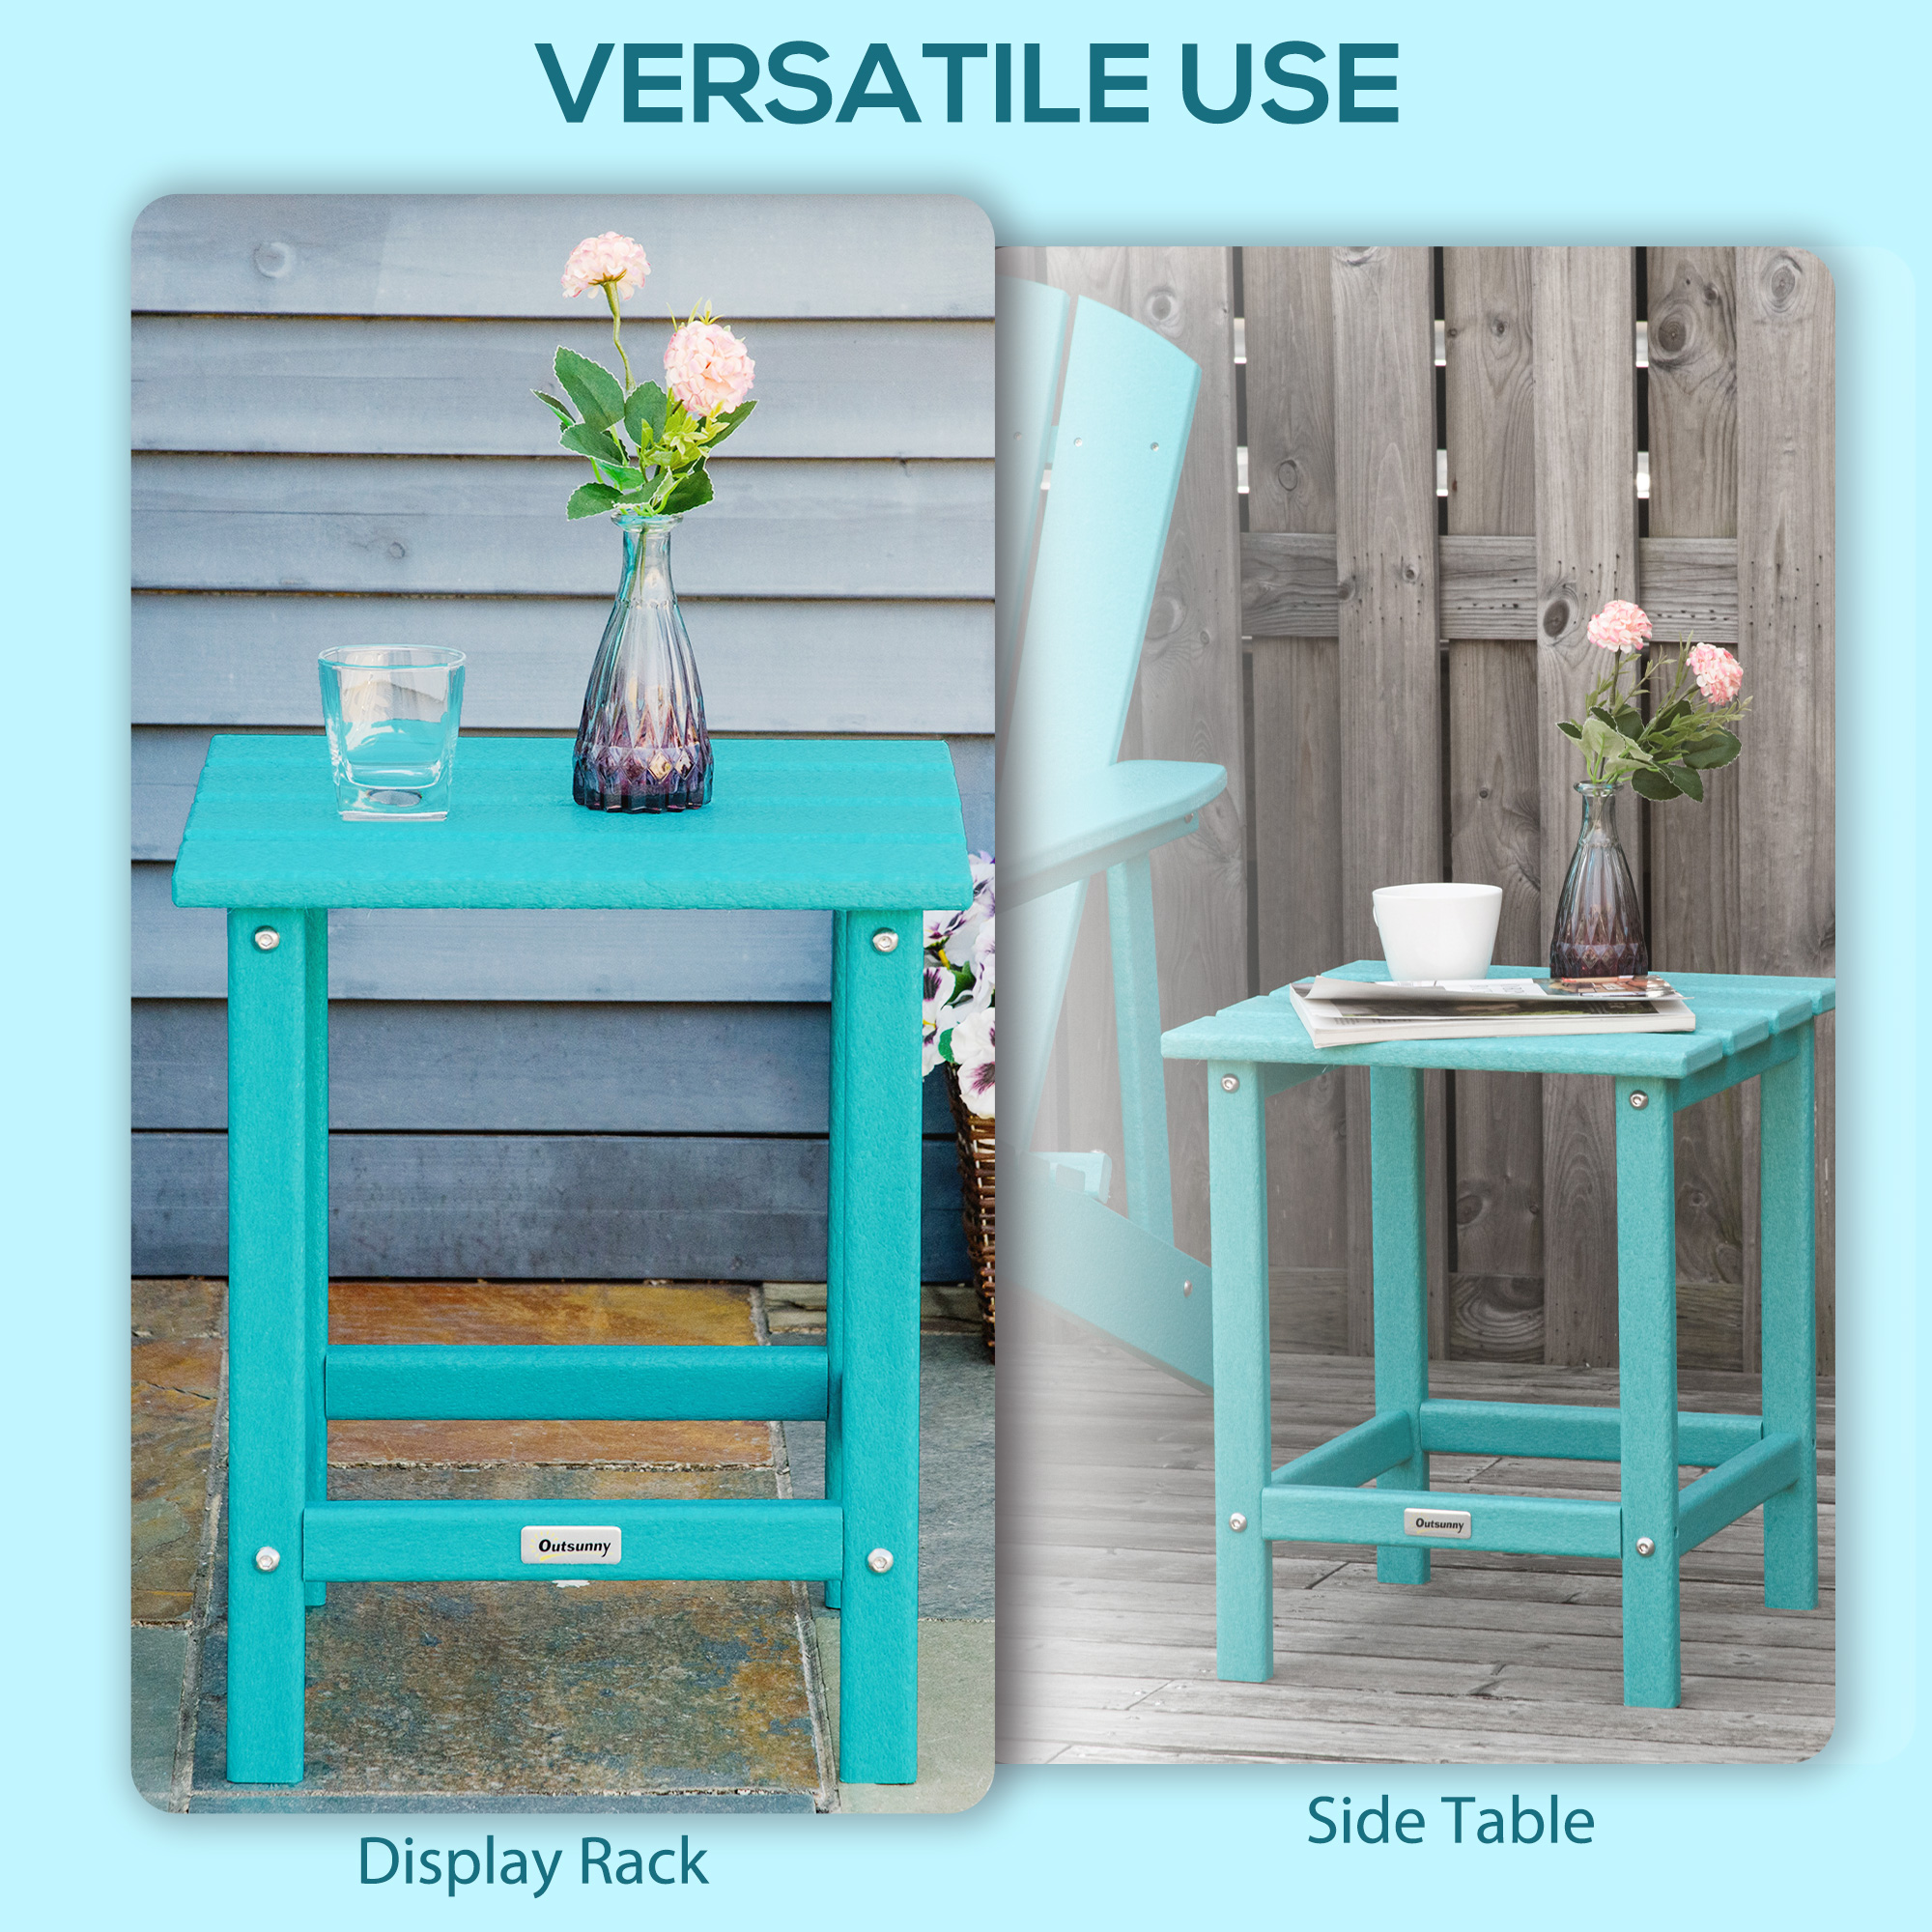 Outsunny 15" Patio End Table, HDPE Plastic, Turquoise - image 4 of 9